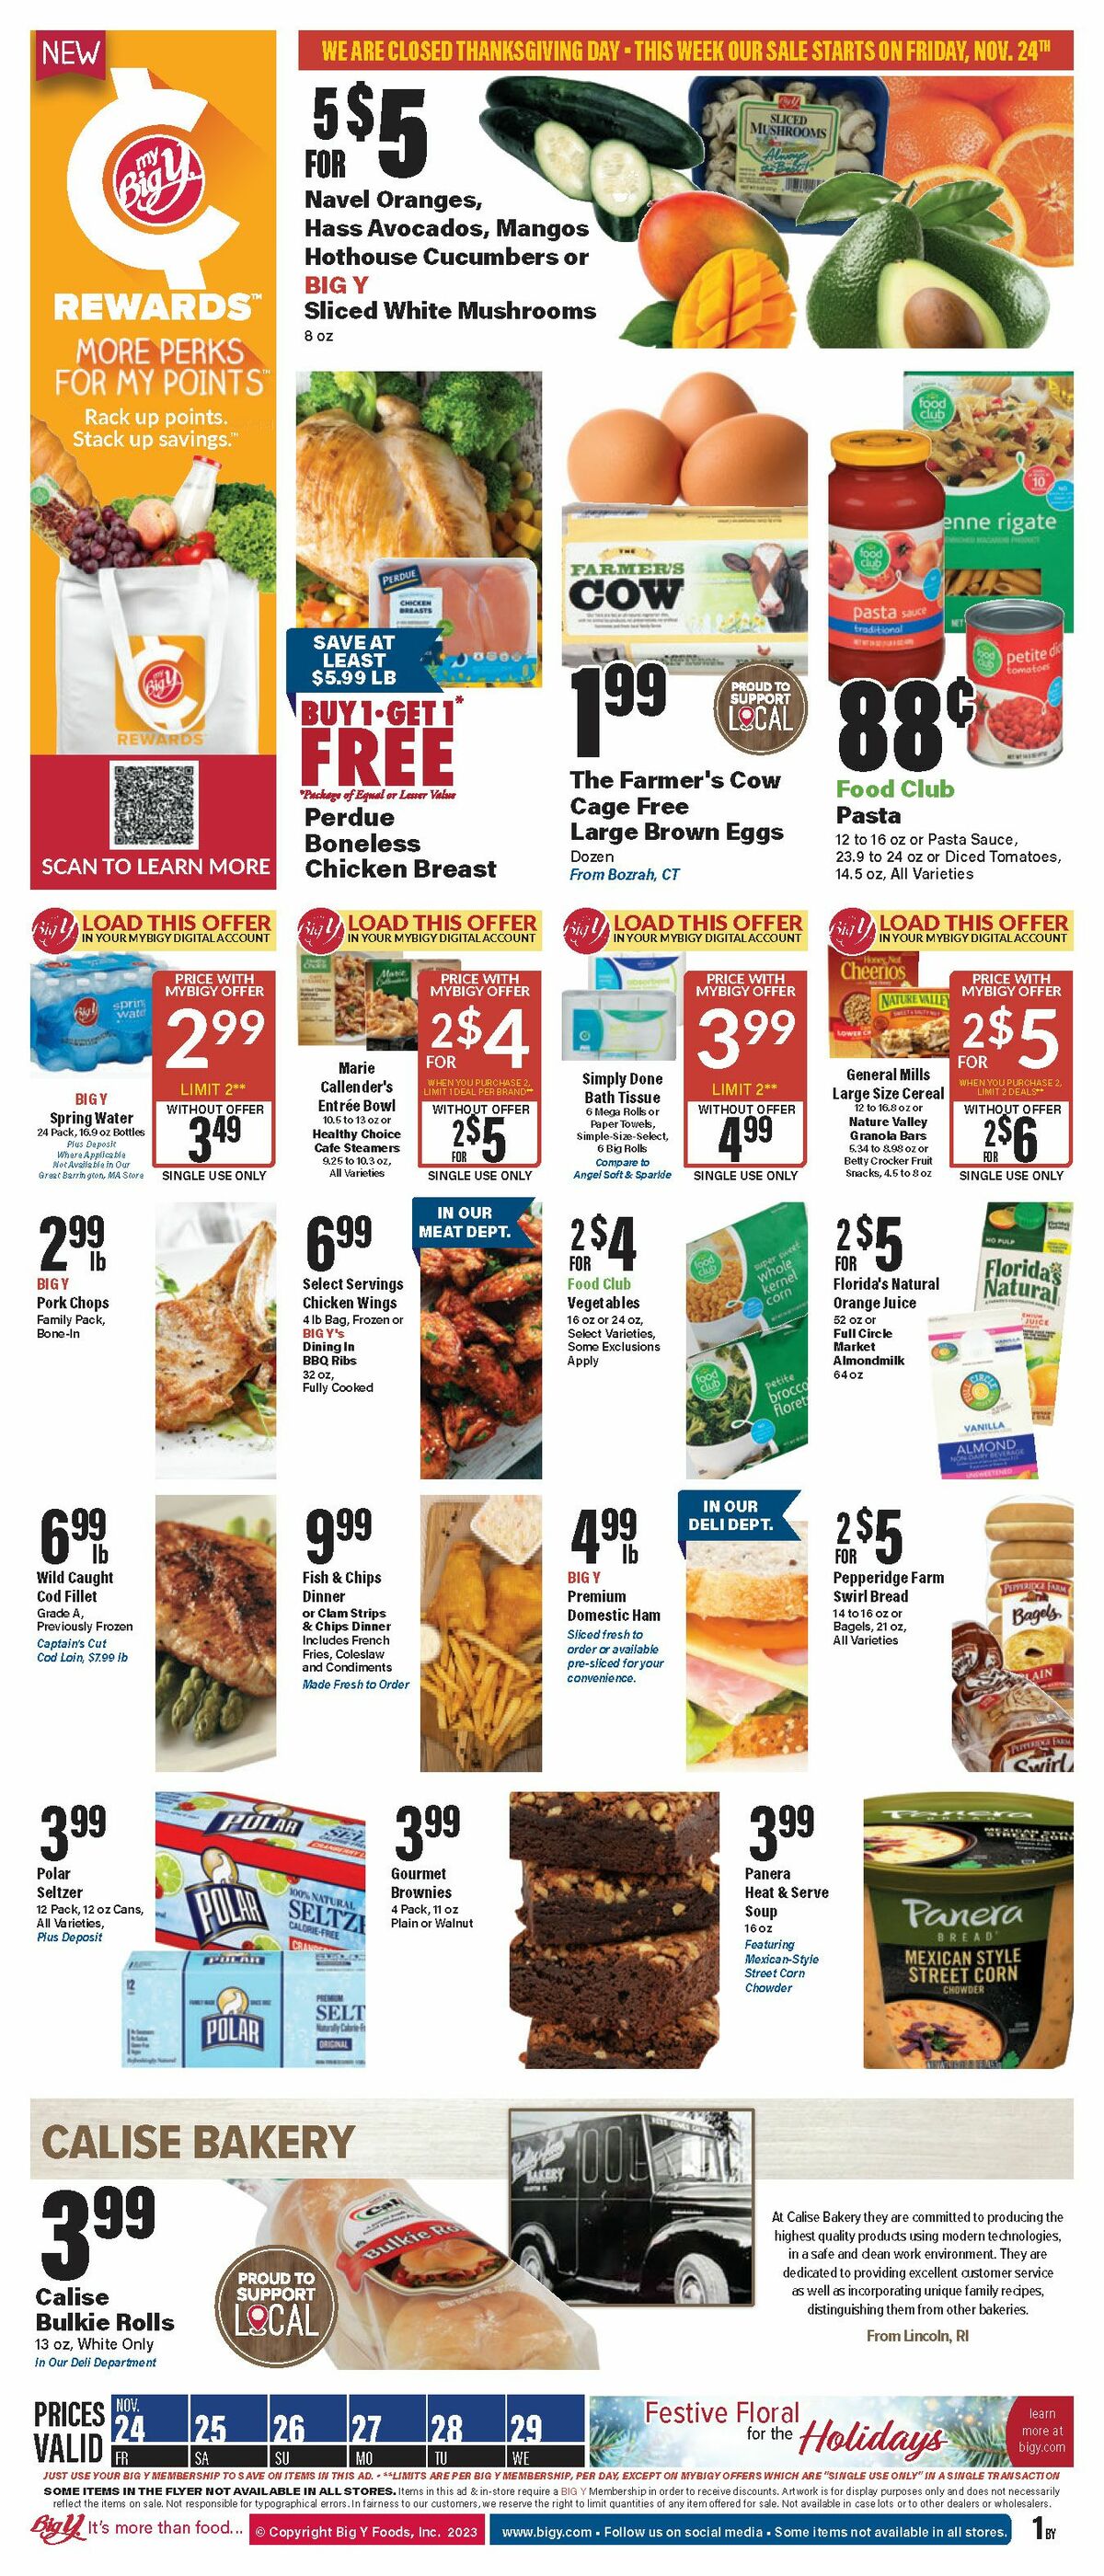 Big Y Weekly Ads & Flyers from November 23